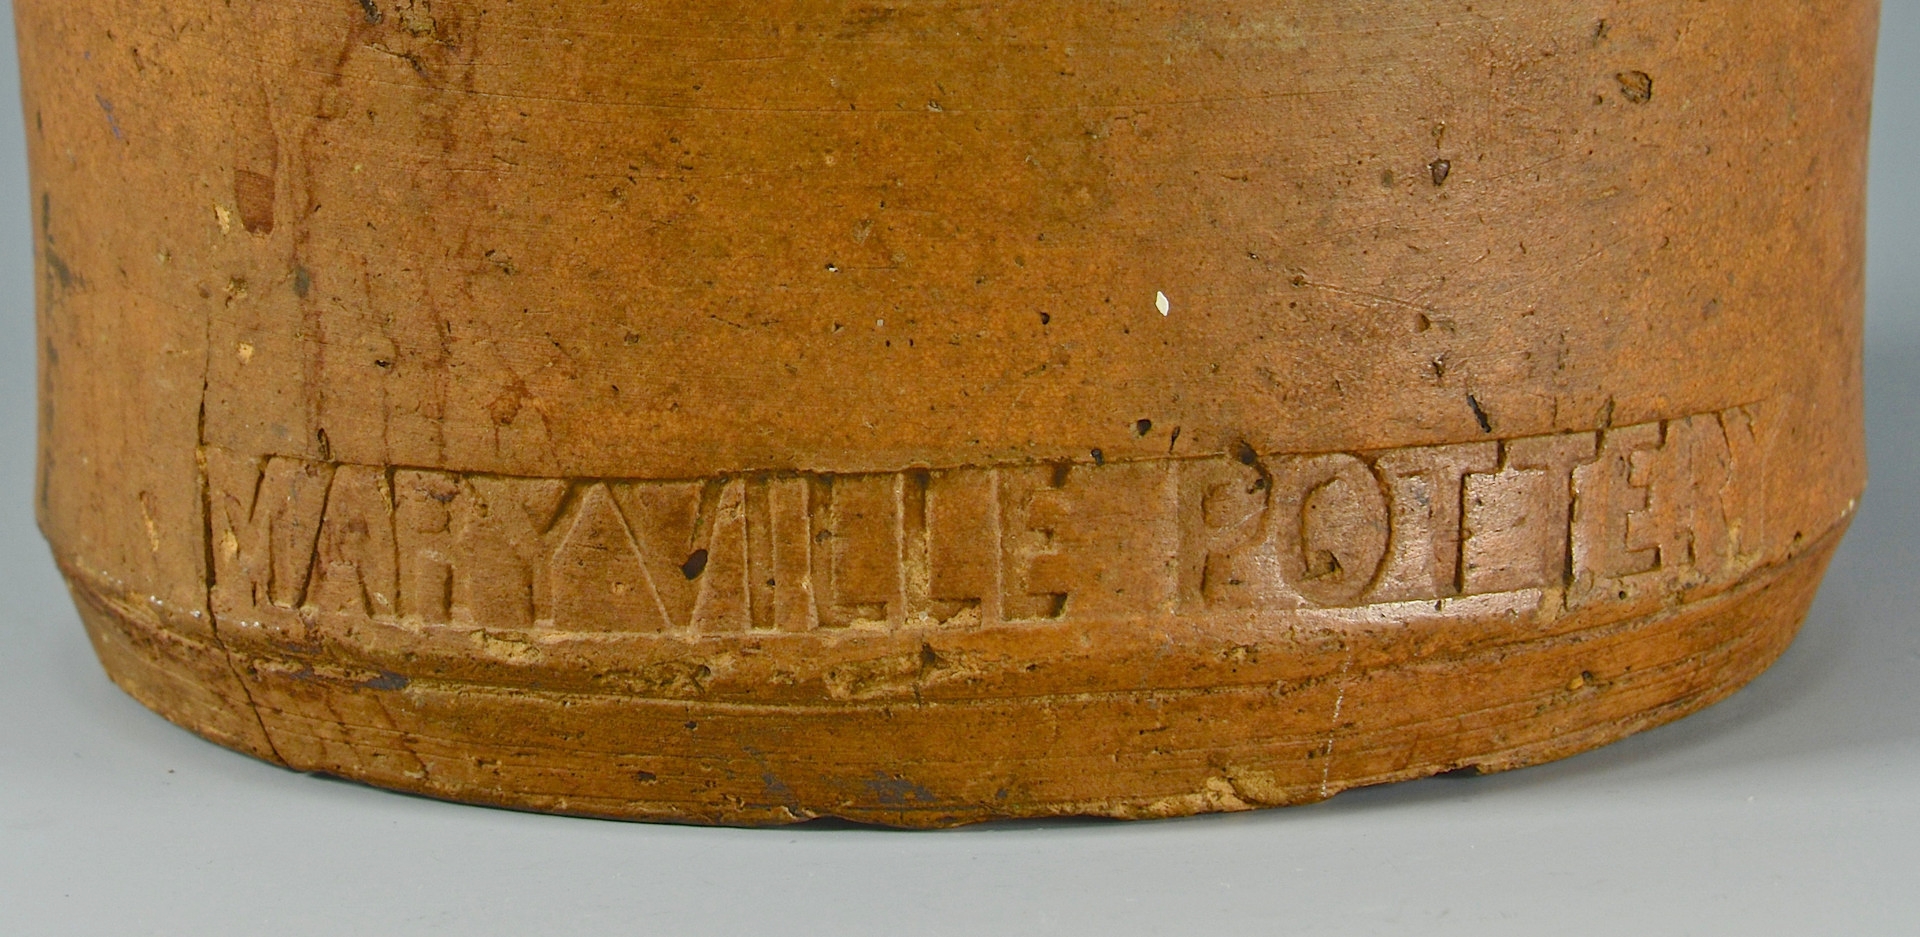 Lot 130: Tennessee jug stamped Maryville Pottery